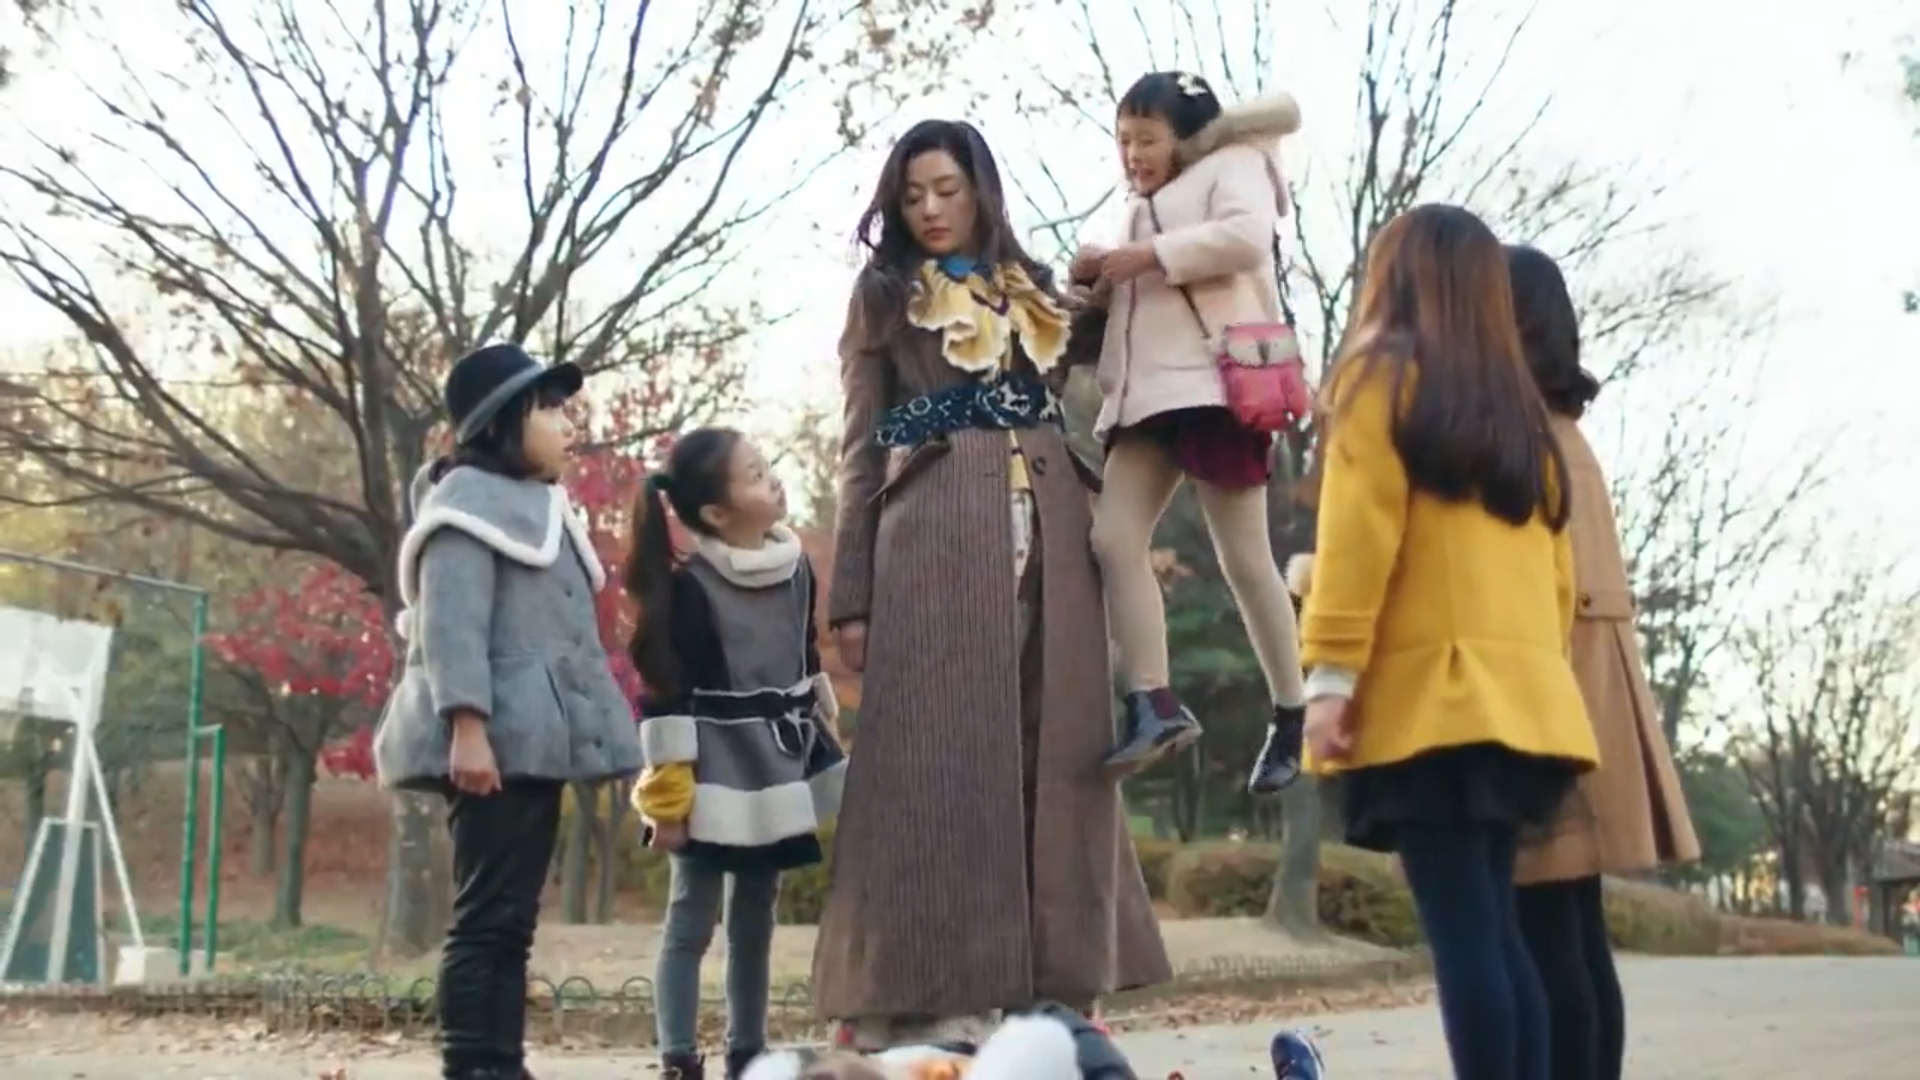 Sim Cheong lifting up the child that was bothering Yoon Ah